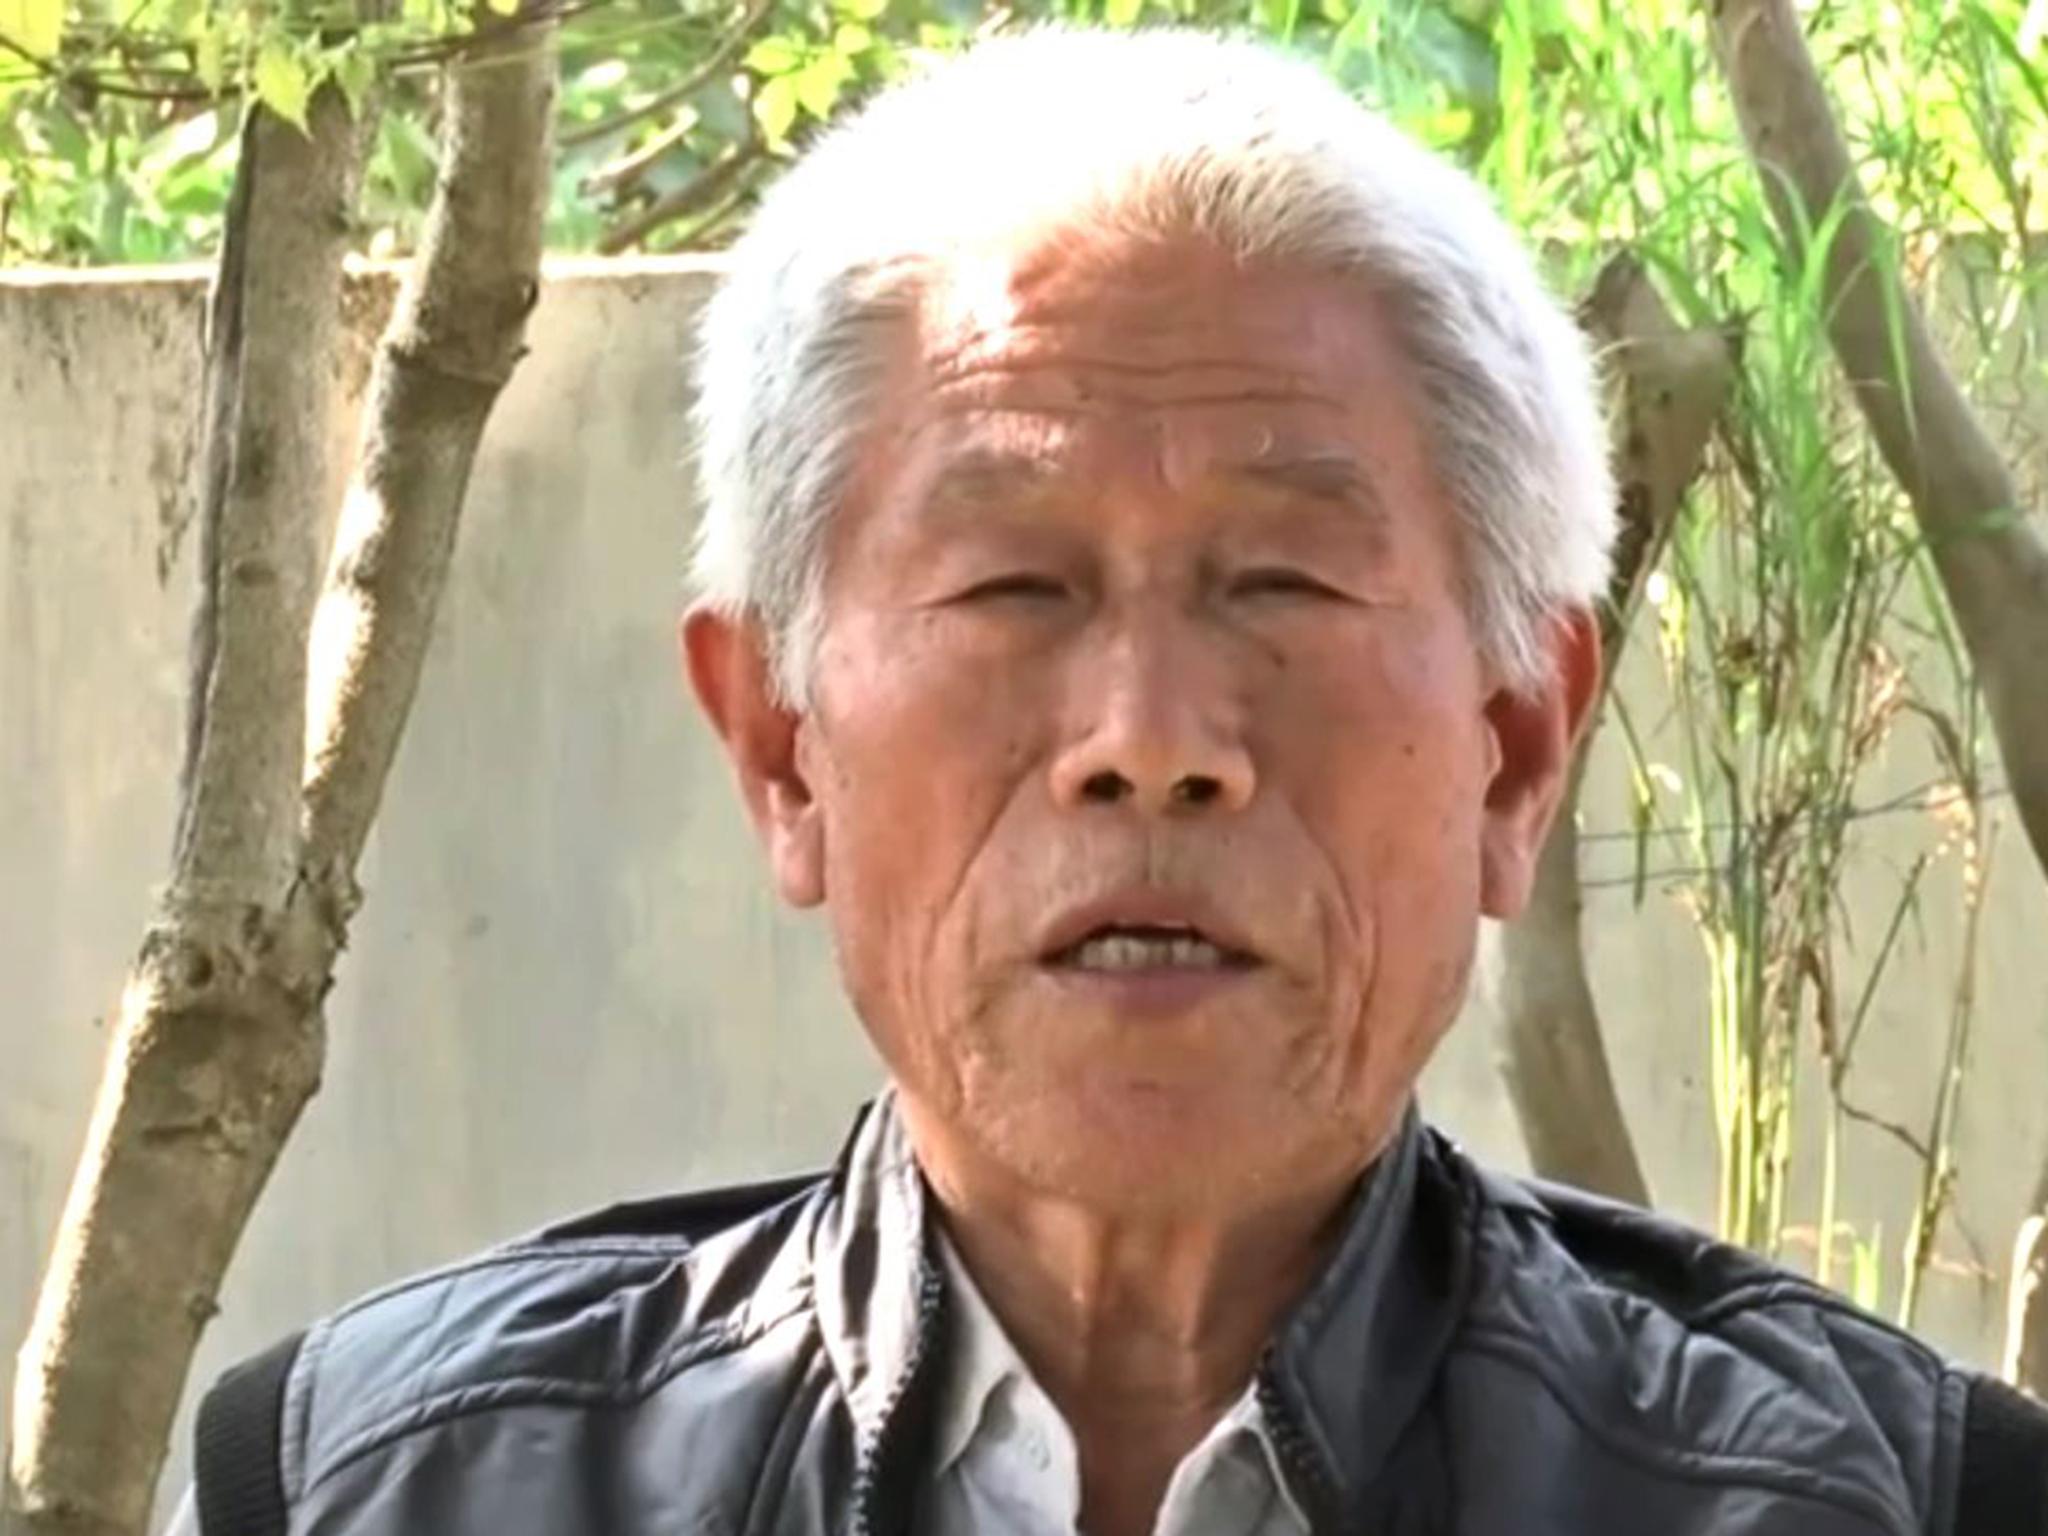 Chinese man goes home after 50 years trapped in India | The Independent